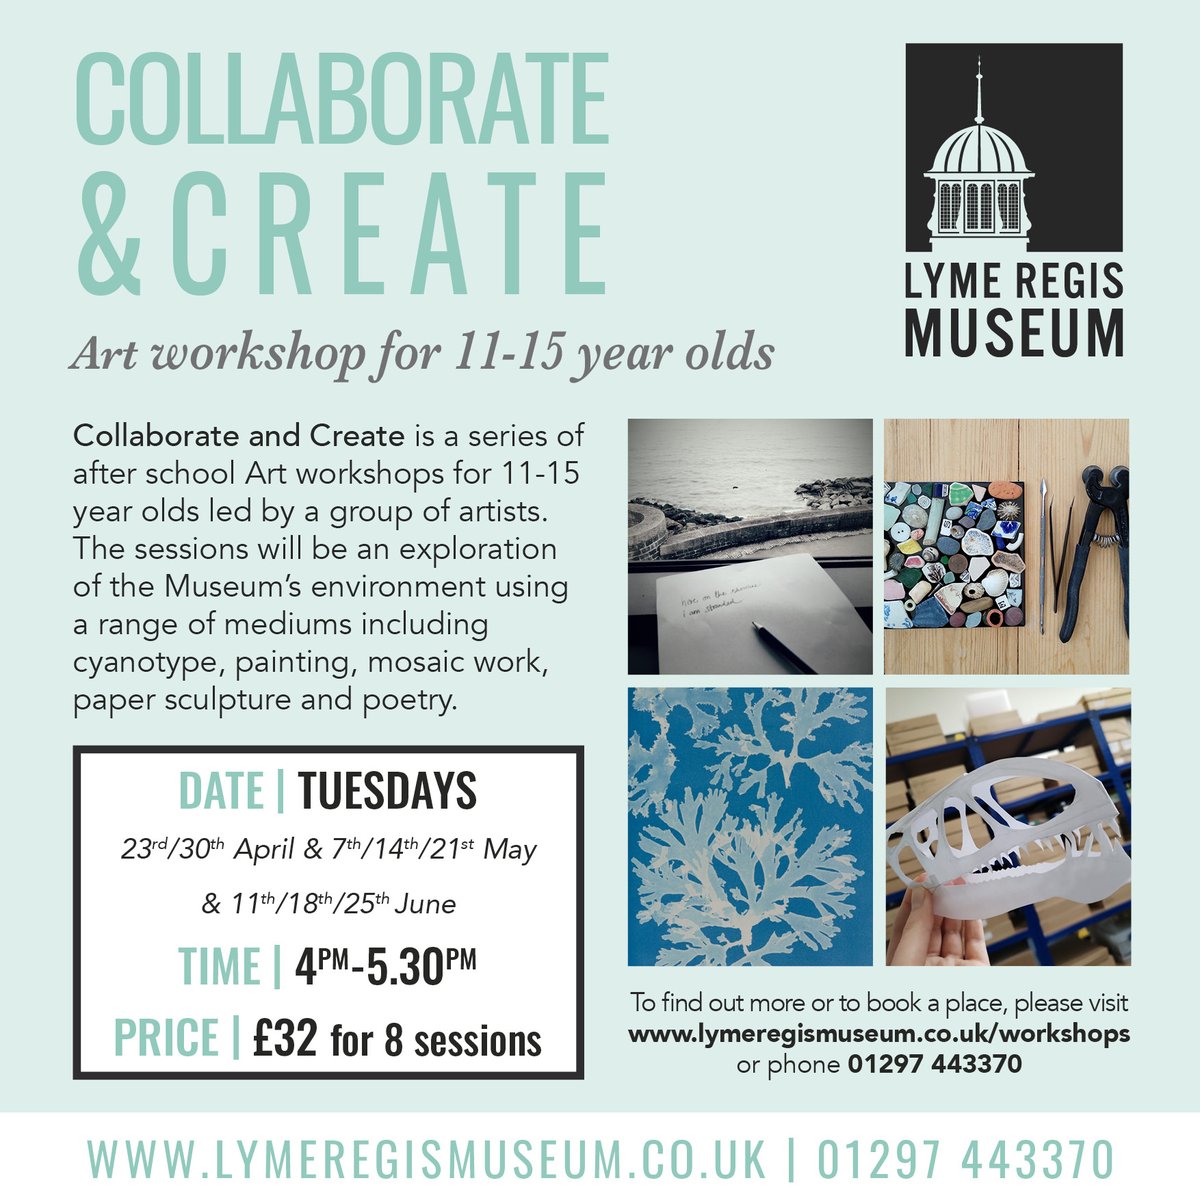 Our new term of 'Collaborate and Create' will start on 23rd April. The after school sessions for 11-15 year olds are held weekly on Tuesdays, 4-5.30pm, and are led by a group of local artists. For more information and to book, please see the link in our bio.